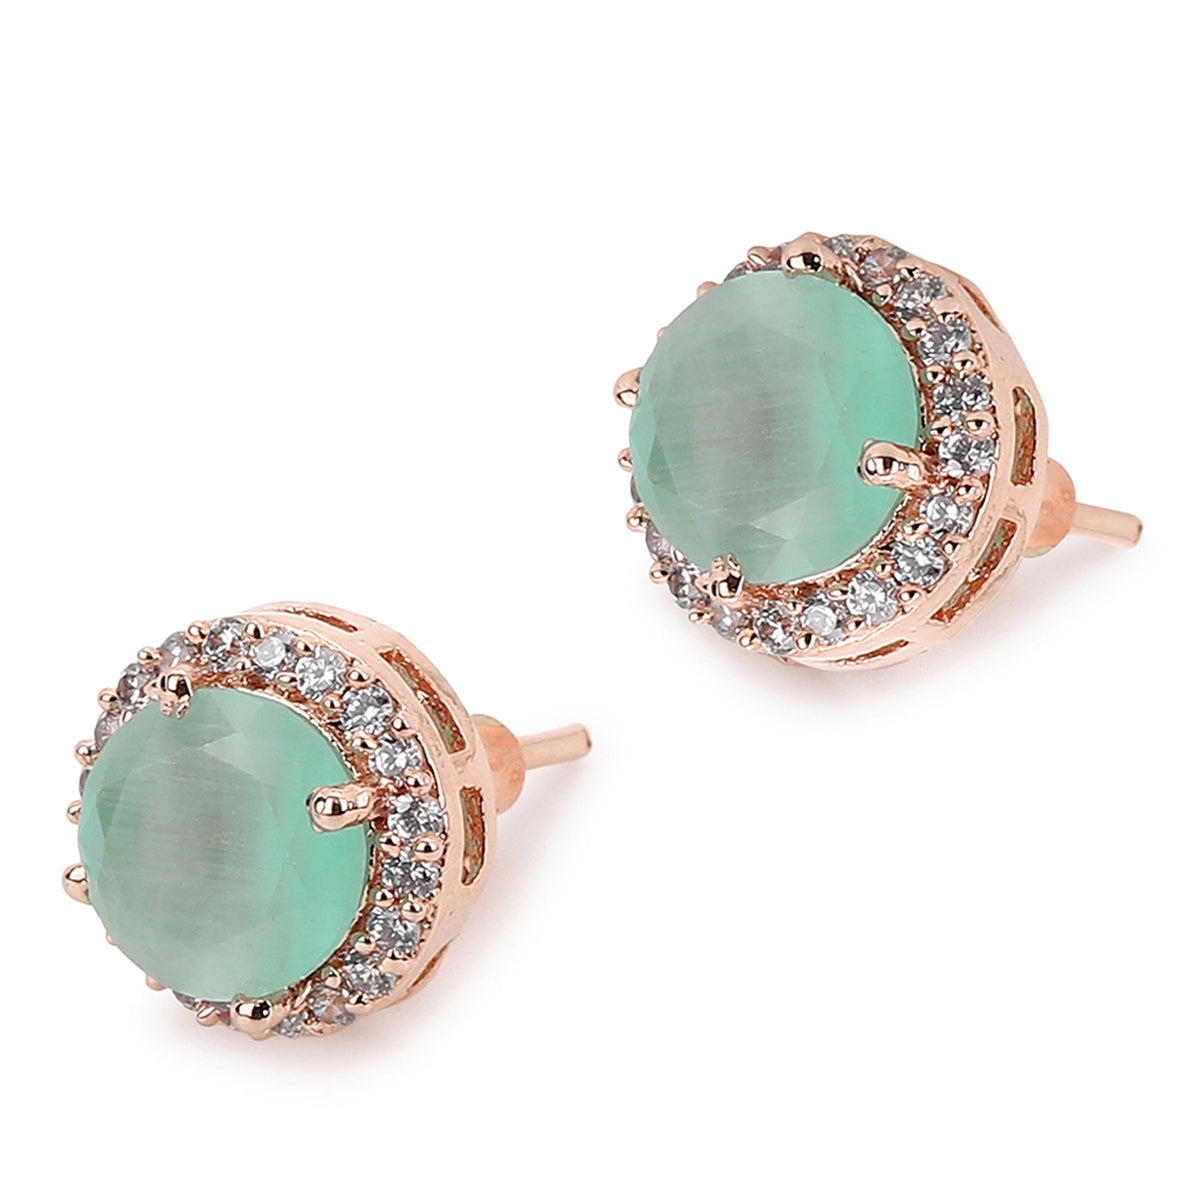 American Diamond CZ Rose Gold Brass Stud Earrings with Green Stone